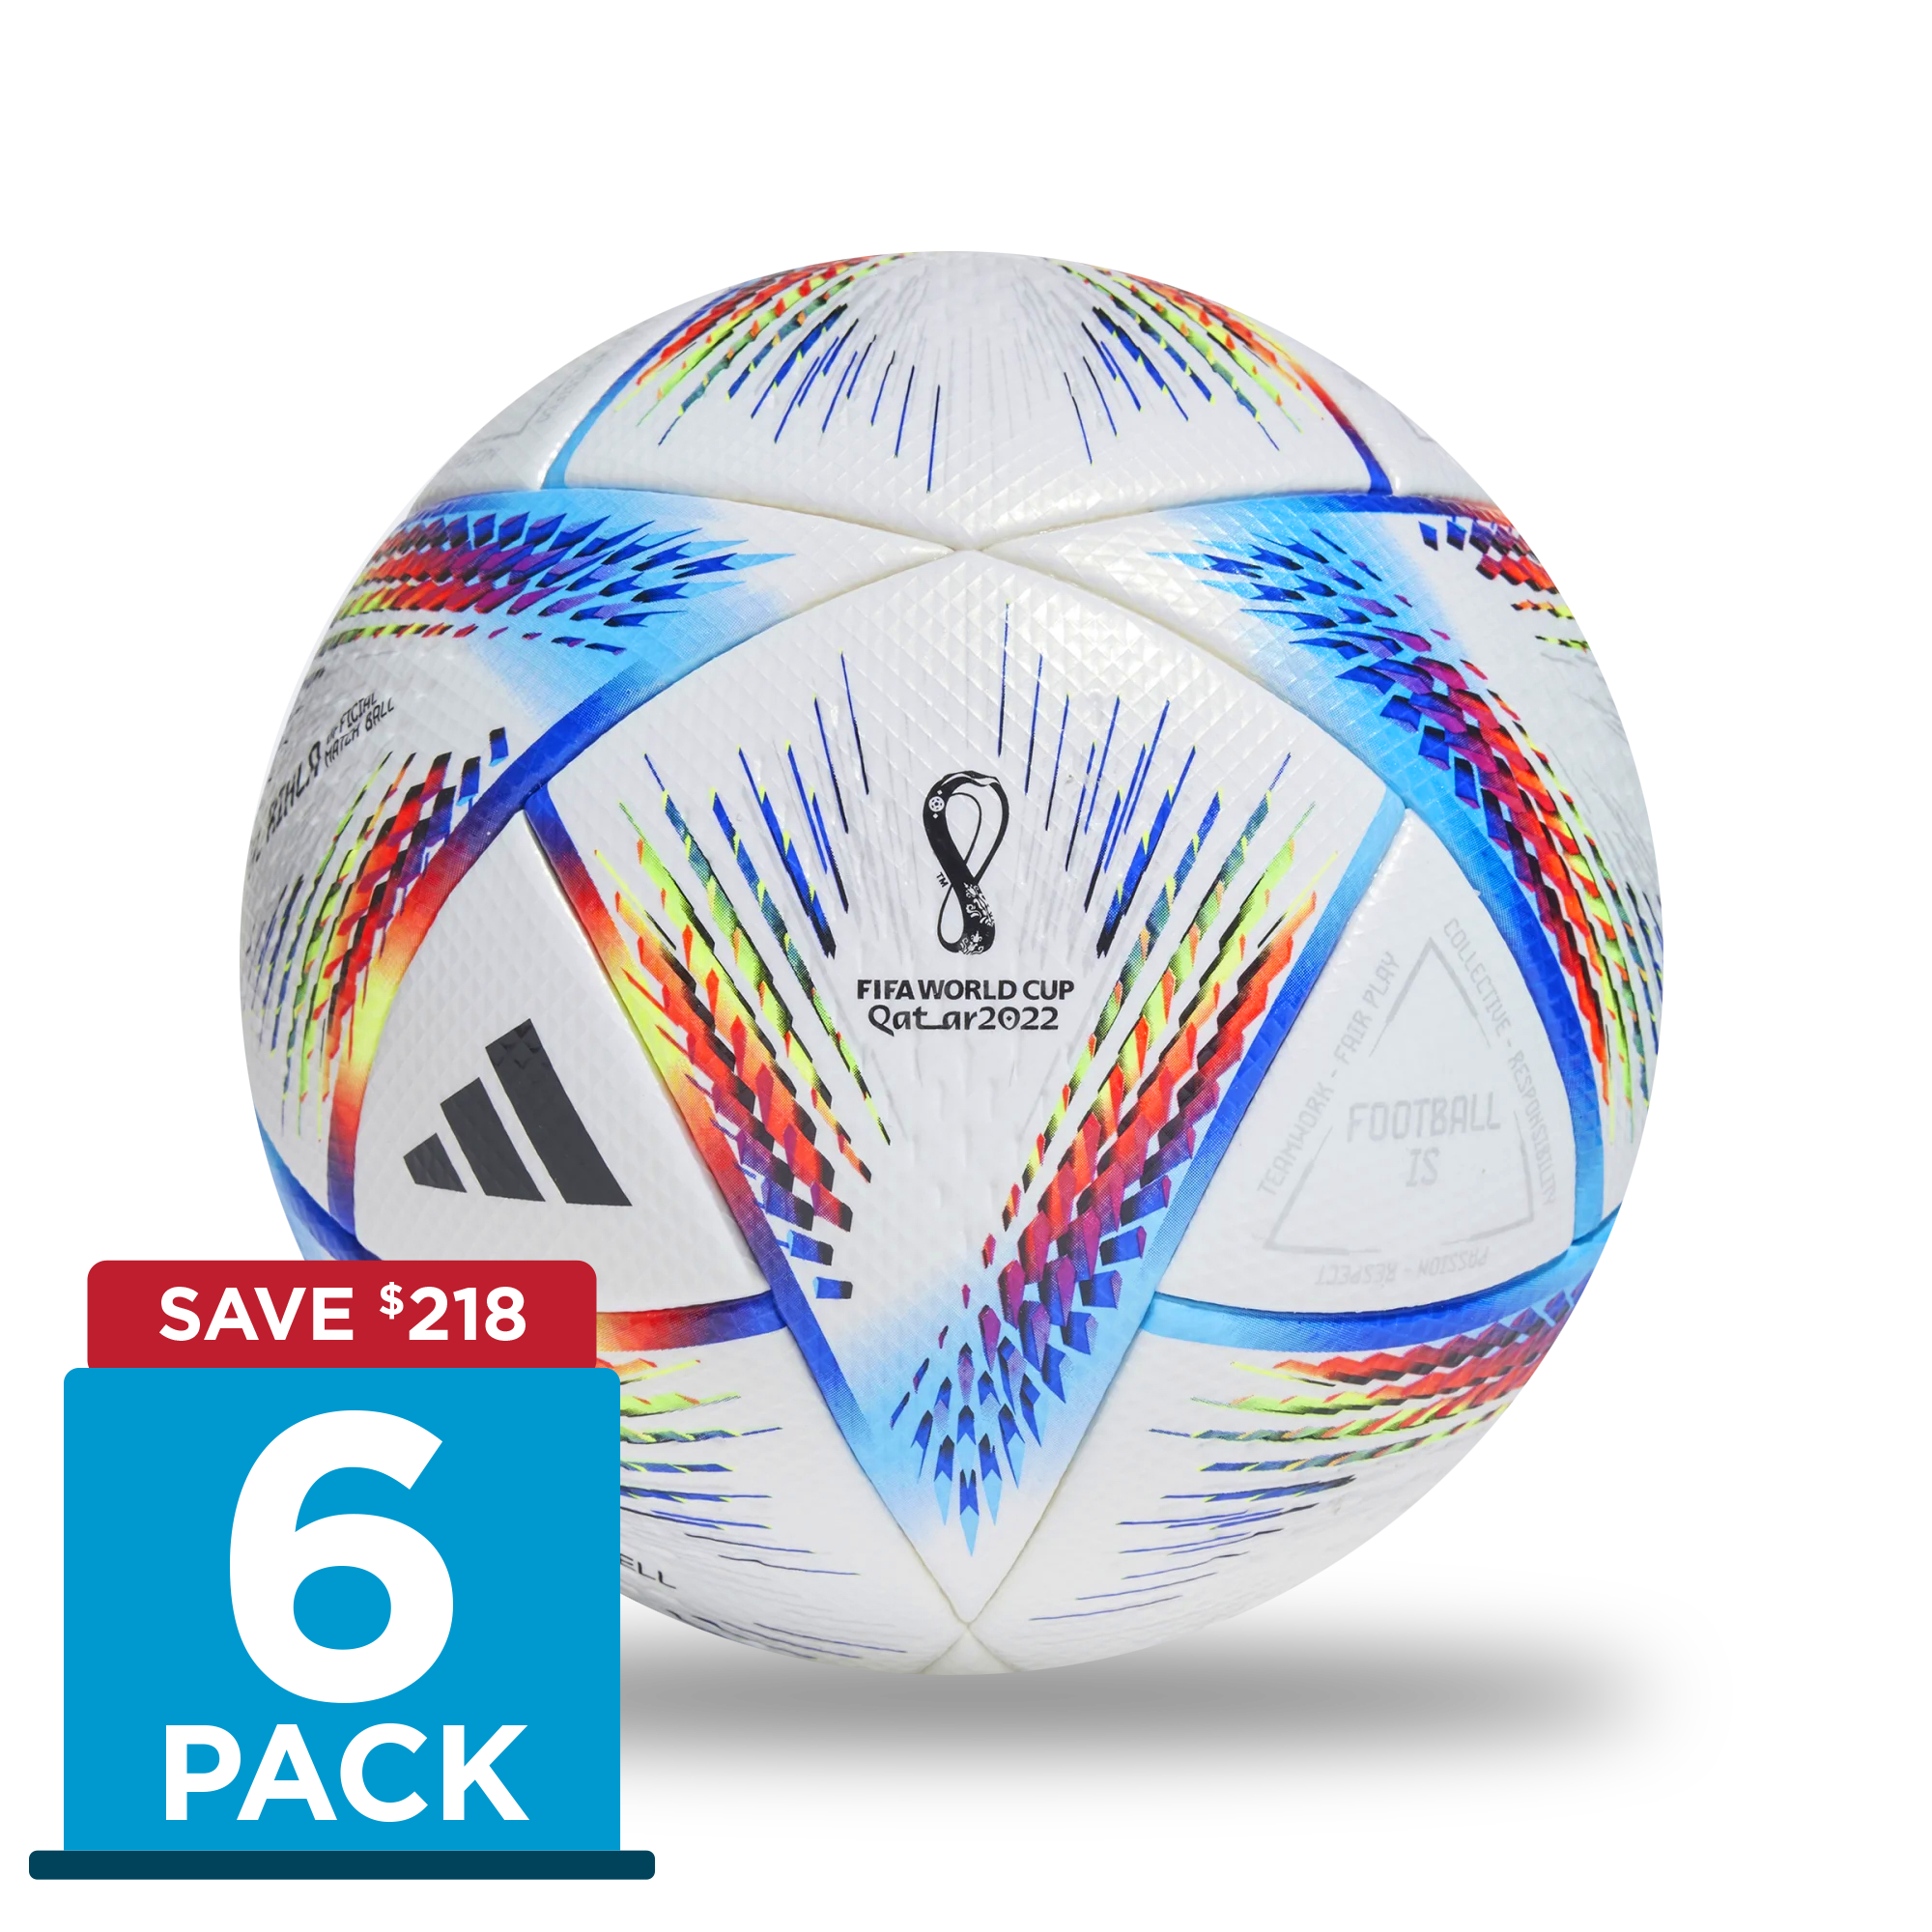 FIFA World Cup Backpacks - Official FIFA Store